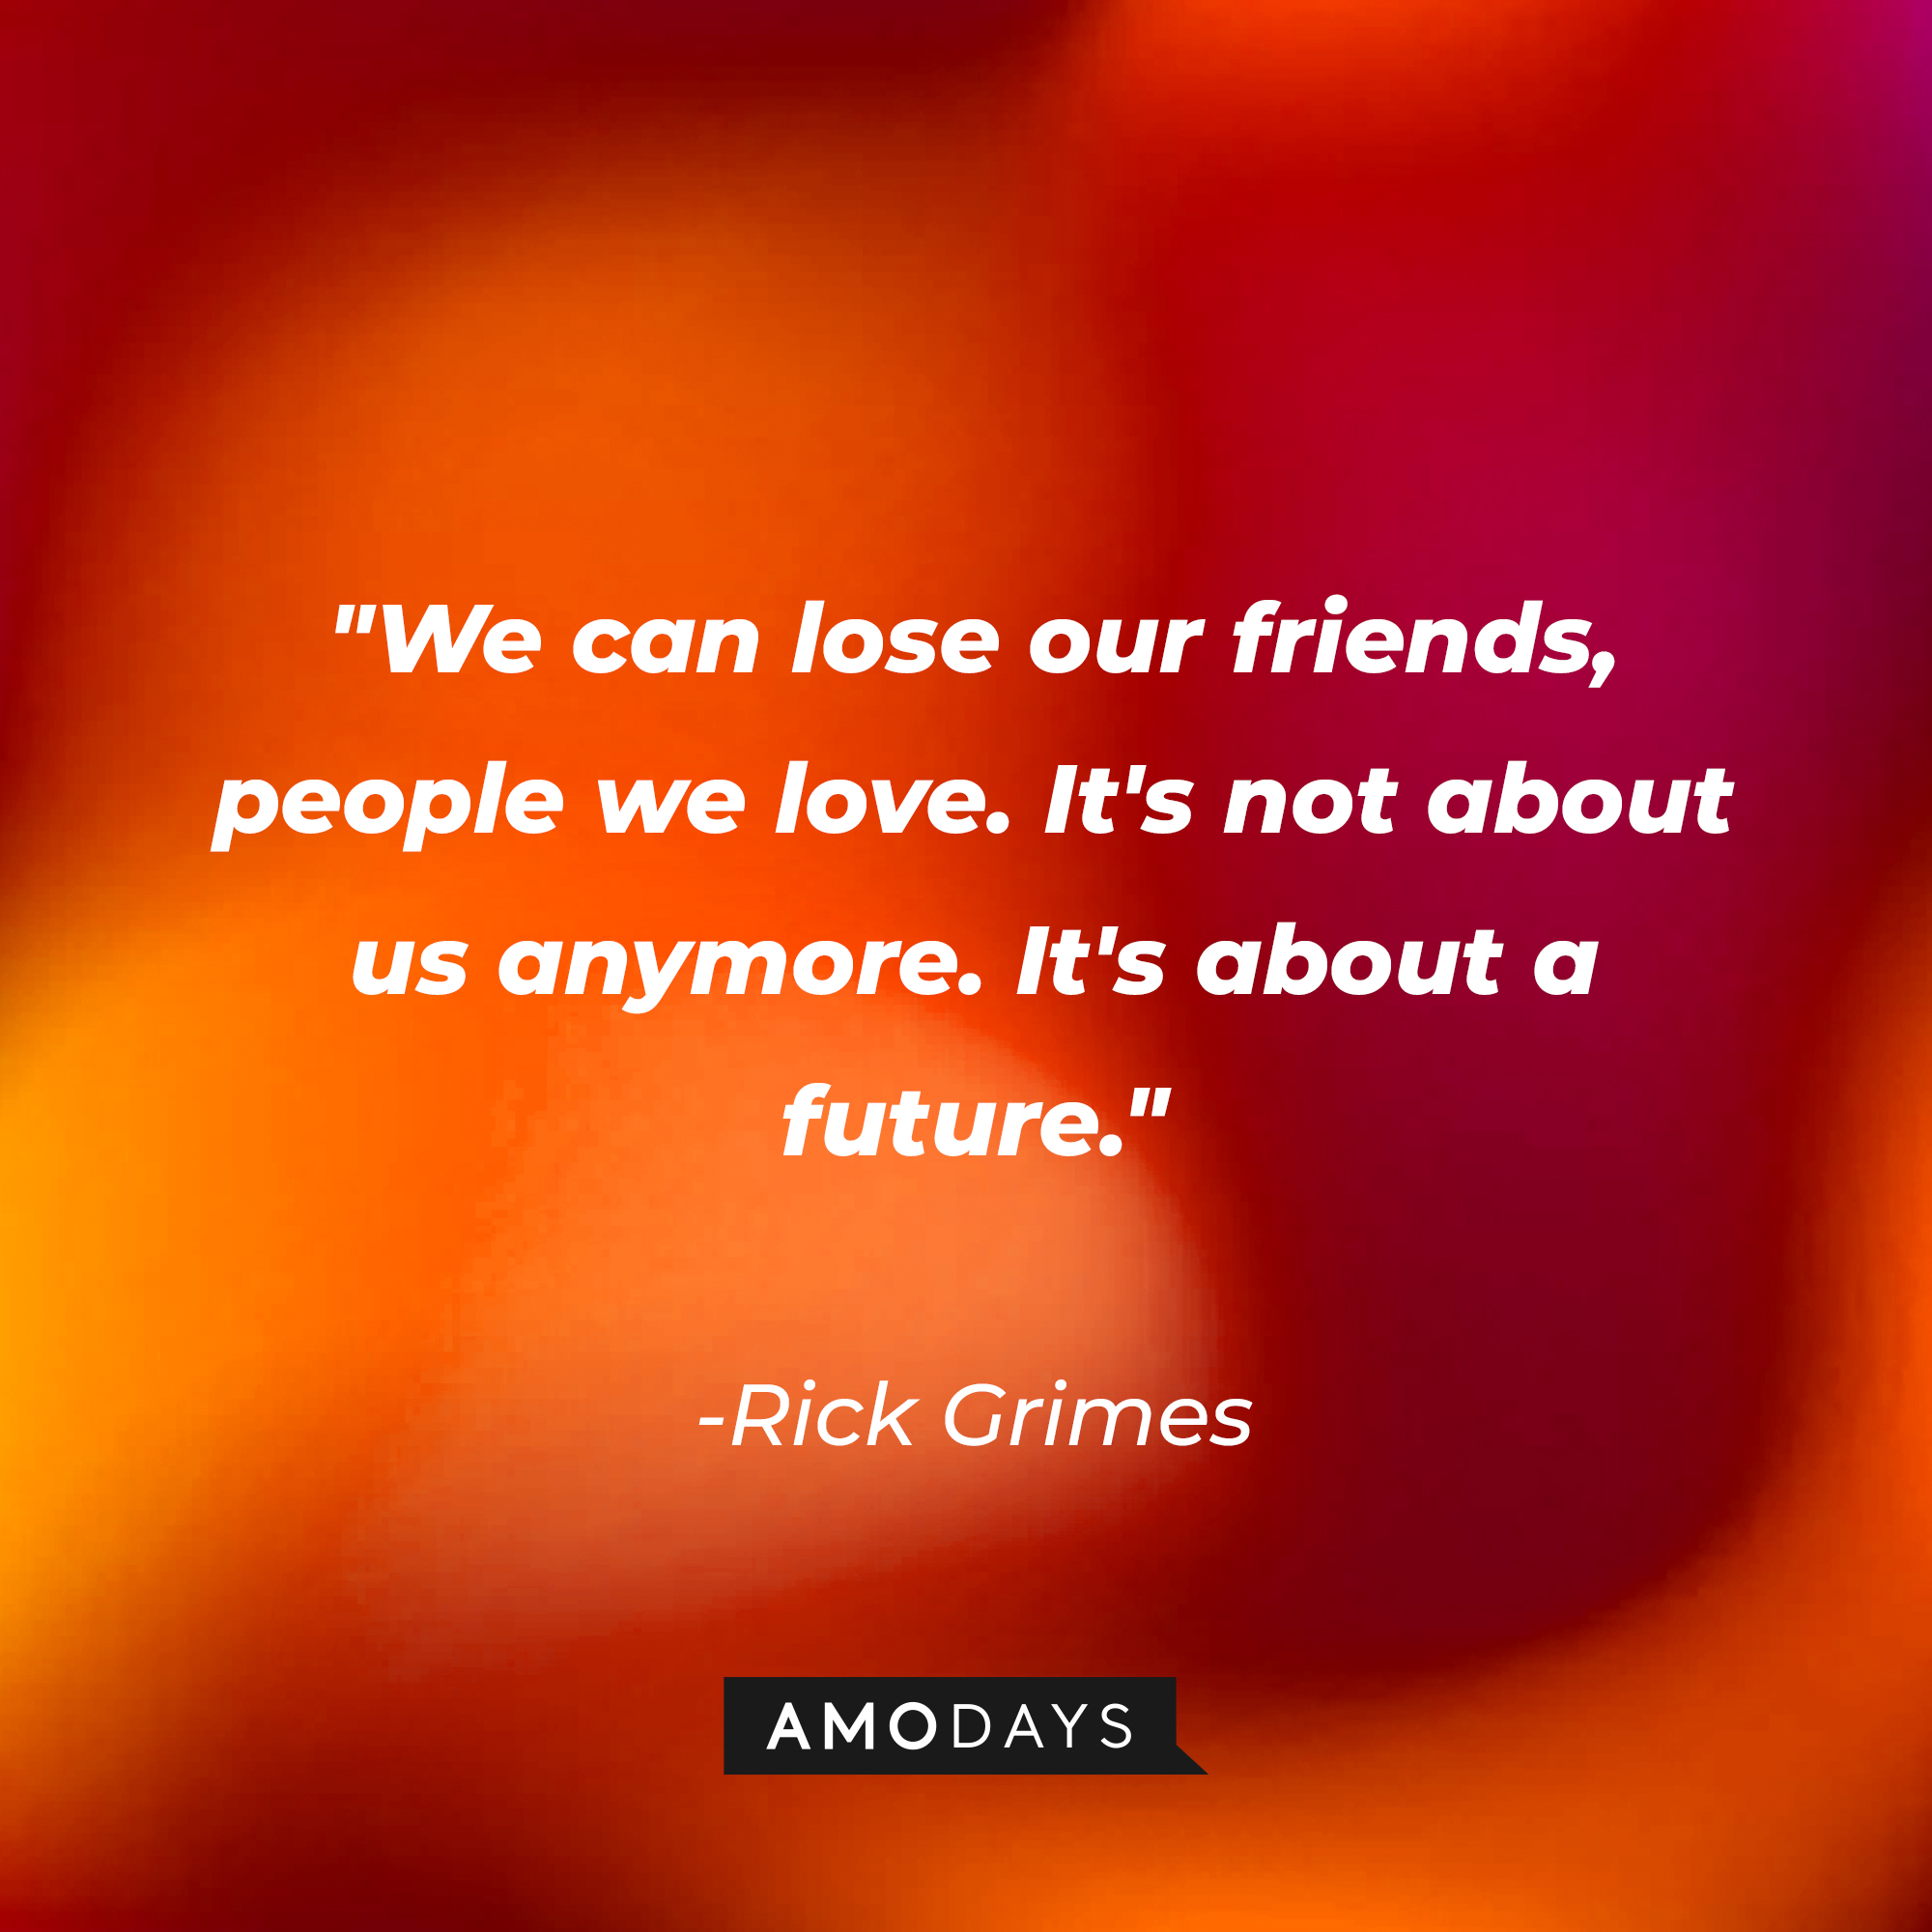 Rick Grimes' quote: "We can lose our friends, people we love. It's not about us anymore. It's about a future." | Source: AmoDays